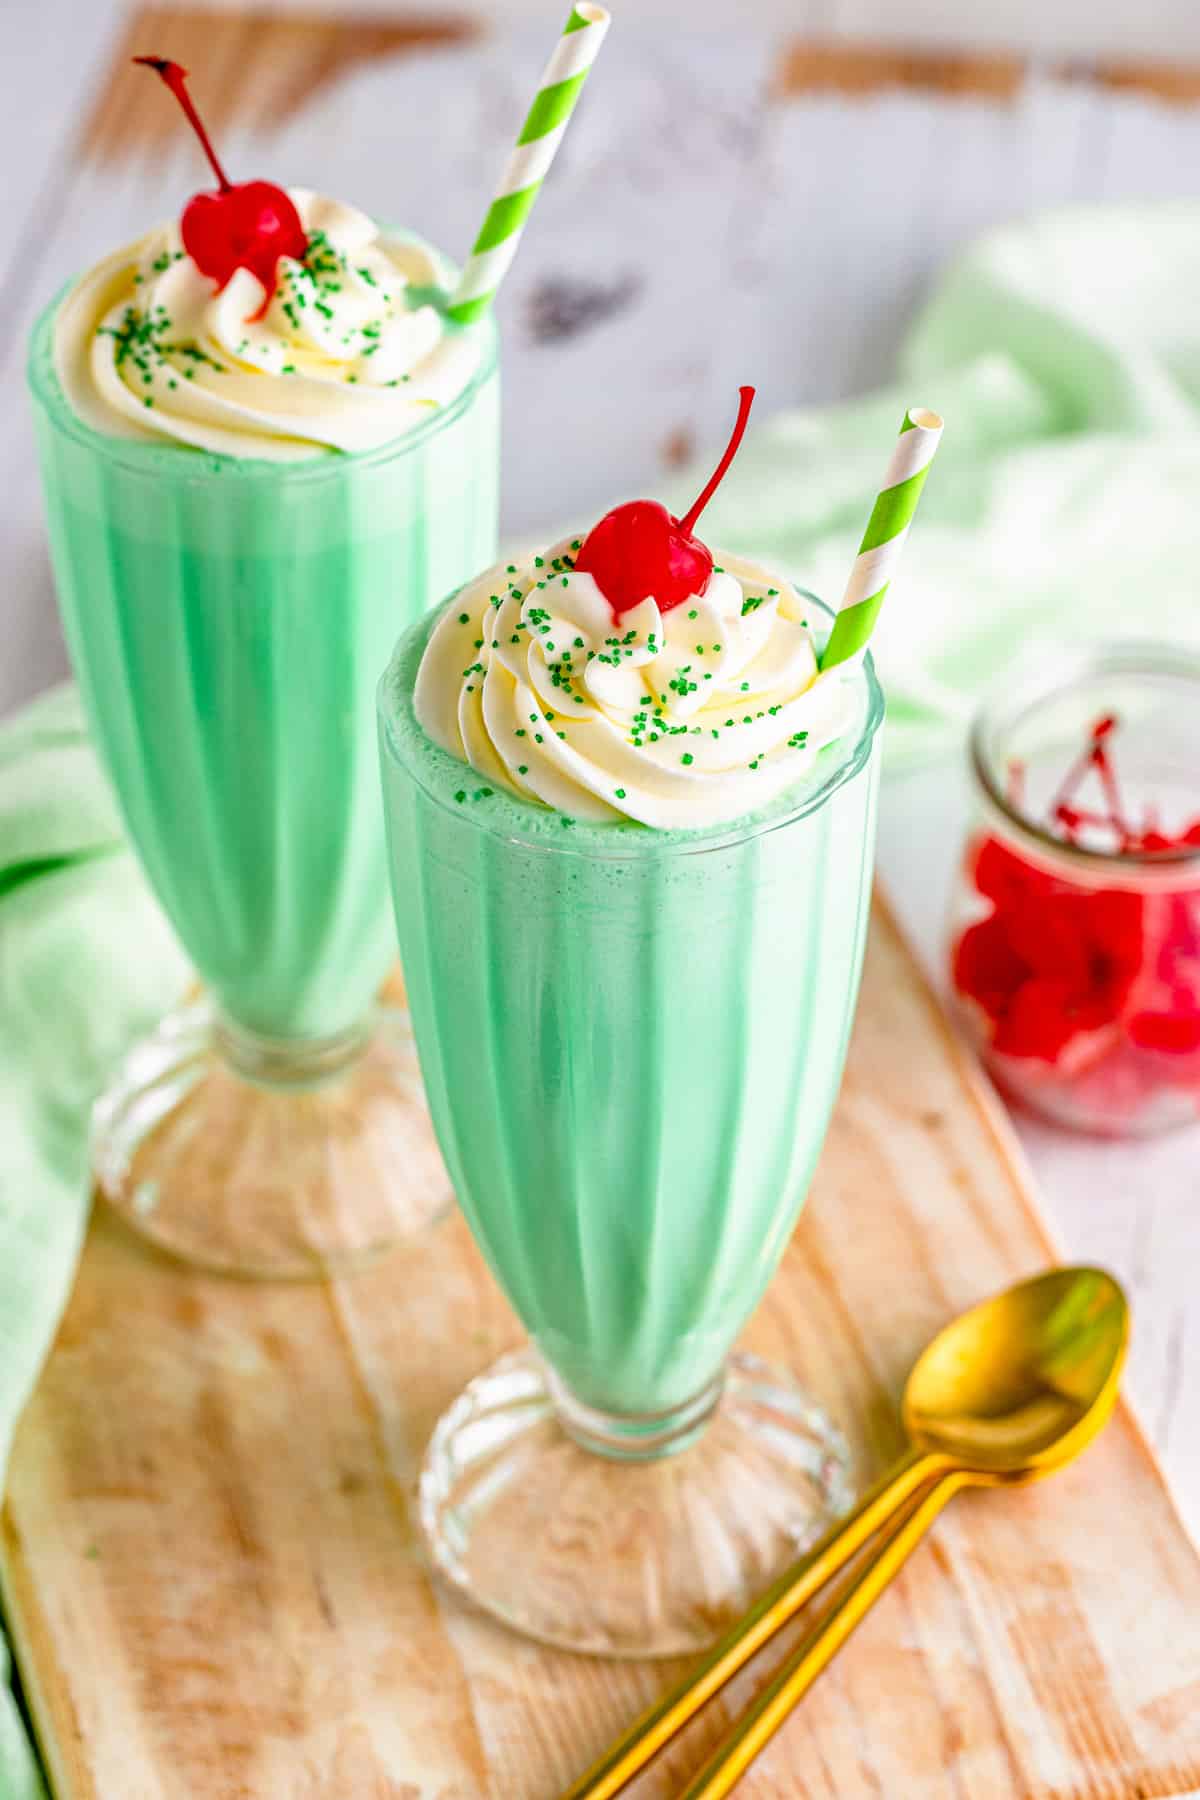 Two of the Shamrock Shake Recipe on wooden board with golden spoon topped with toppings.